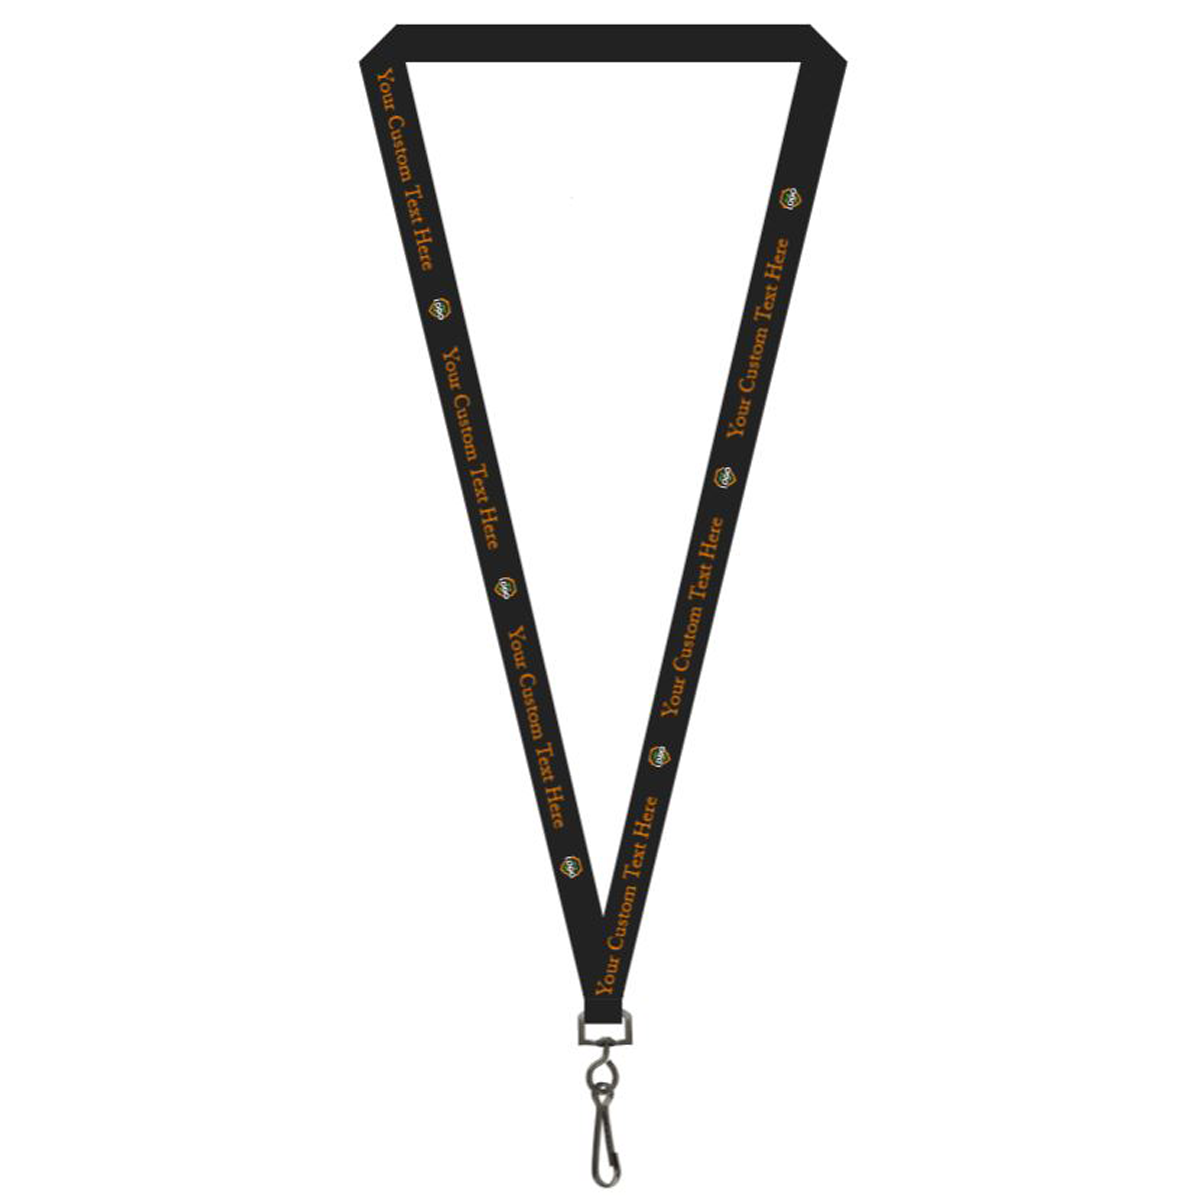 Custom lanyards in bulk - personalized for company events